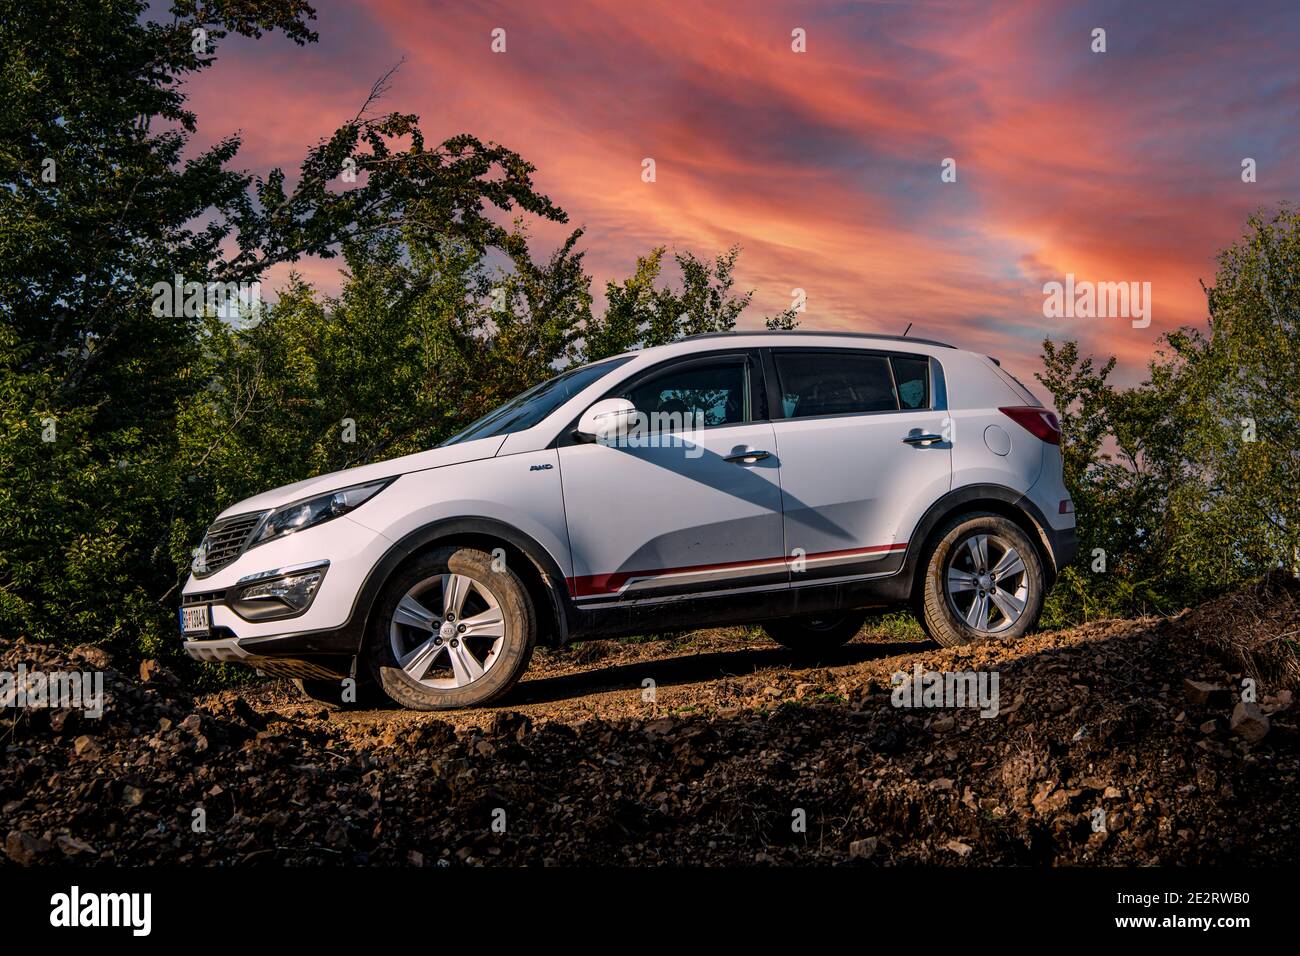 Kia Sportage 2.0 CRDI awd or 4x4, white color, parked on a gravel road, with beautiful orange sunset in the background.  Best car for off road. Tara Stock Photo